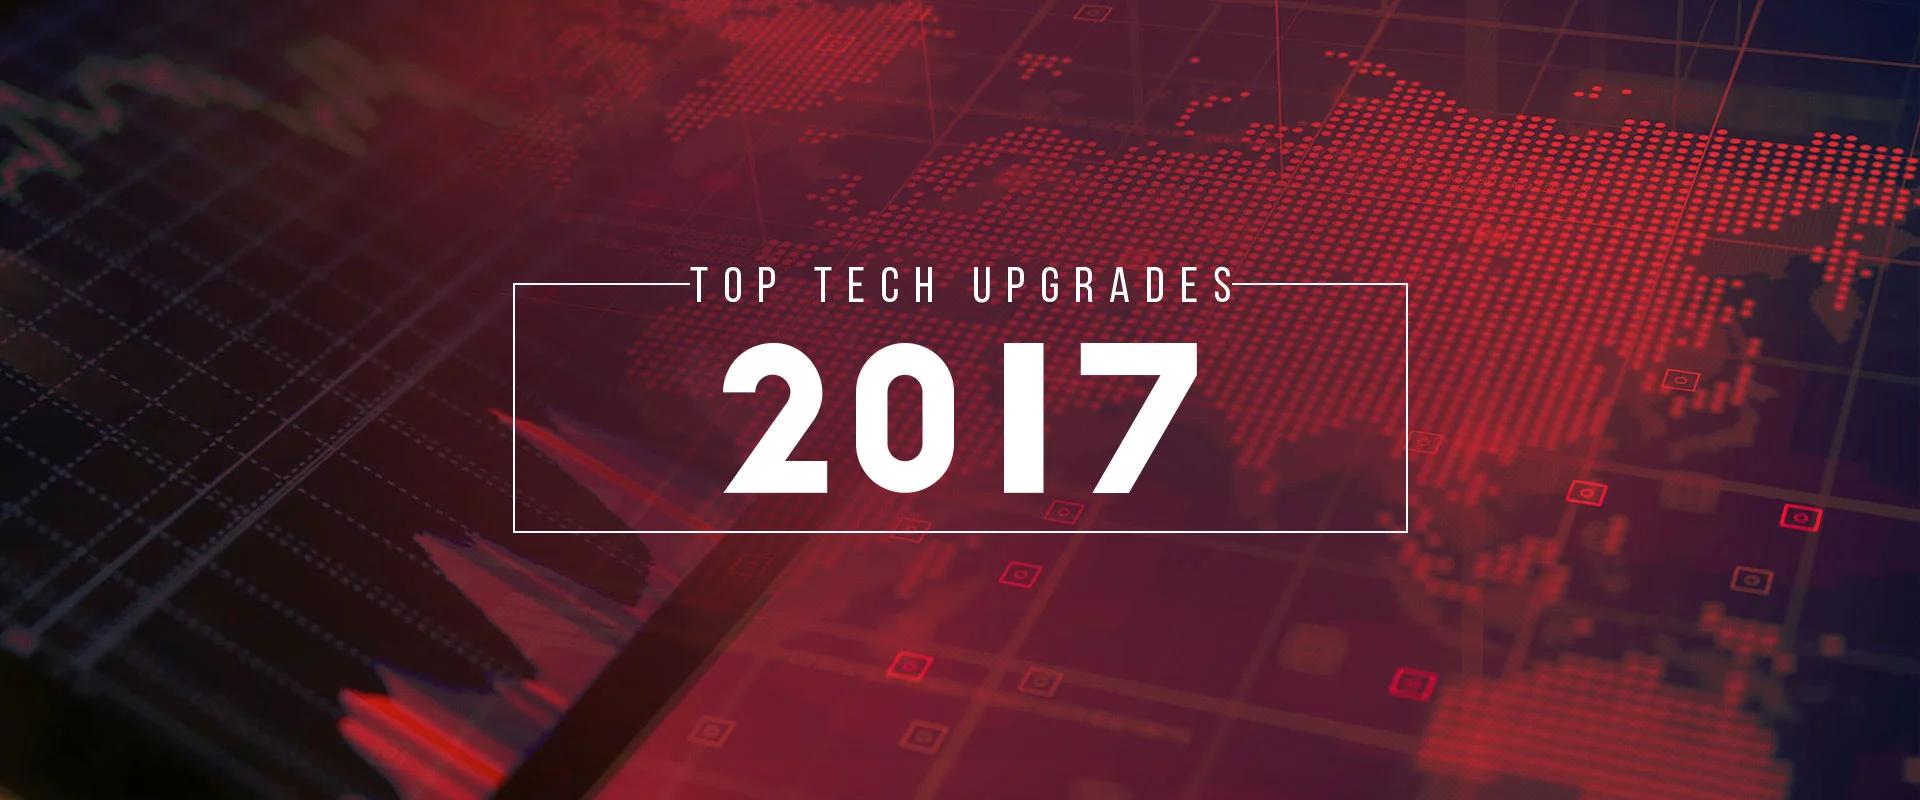 Check out the Top Tech Upgrades for the Year 2018